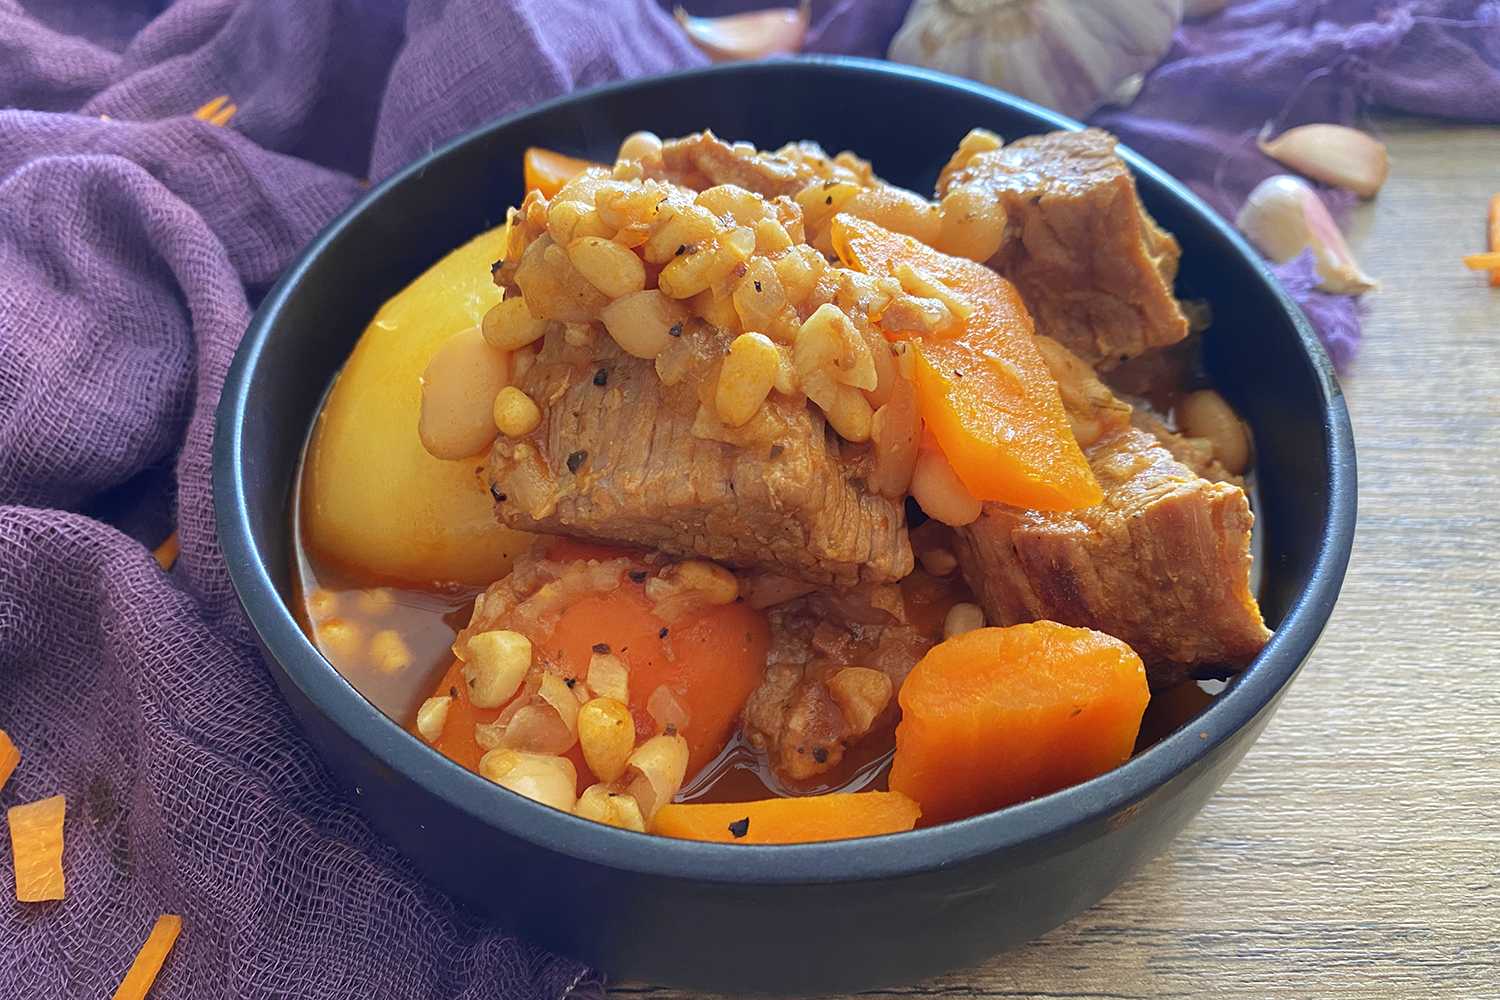 Beef chunks with chopped carrots, whole potato and white beans in red sauce